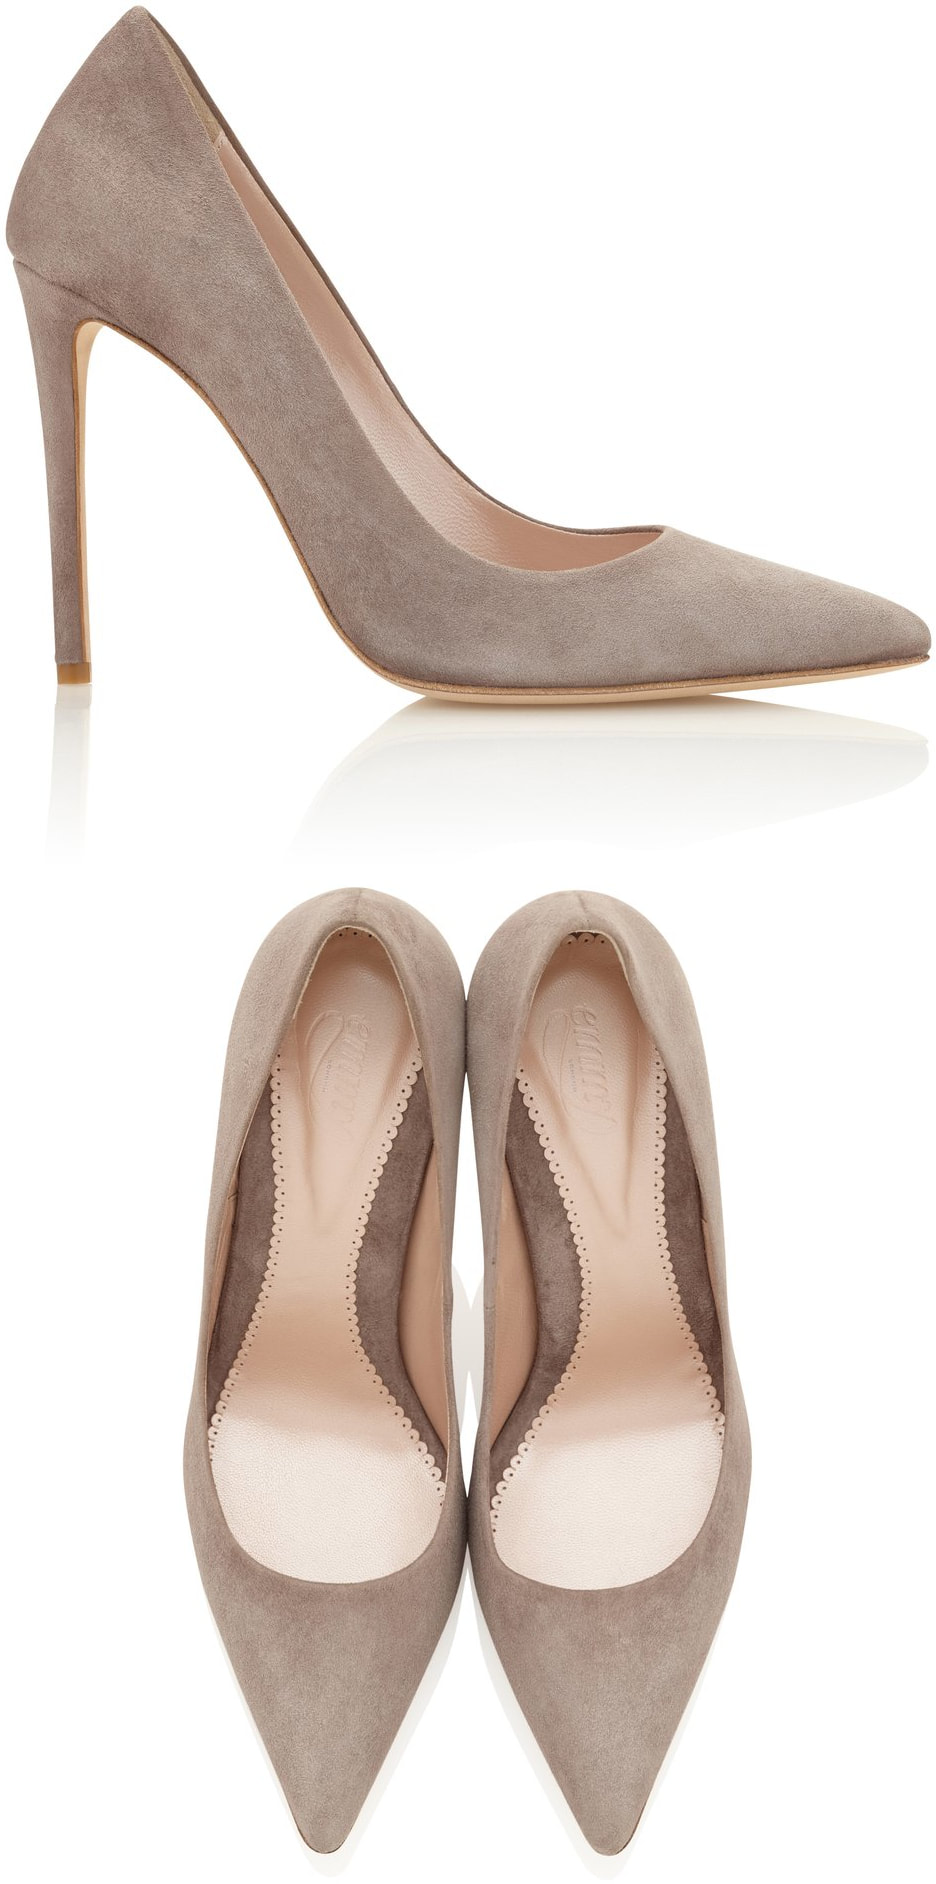 Emmy London Rebecca courts in Cinder suede